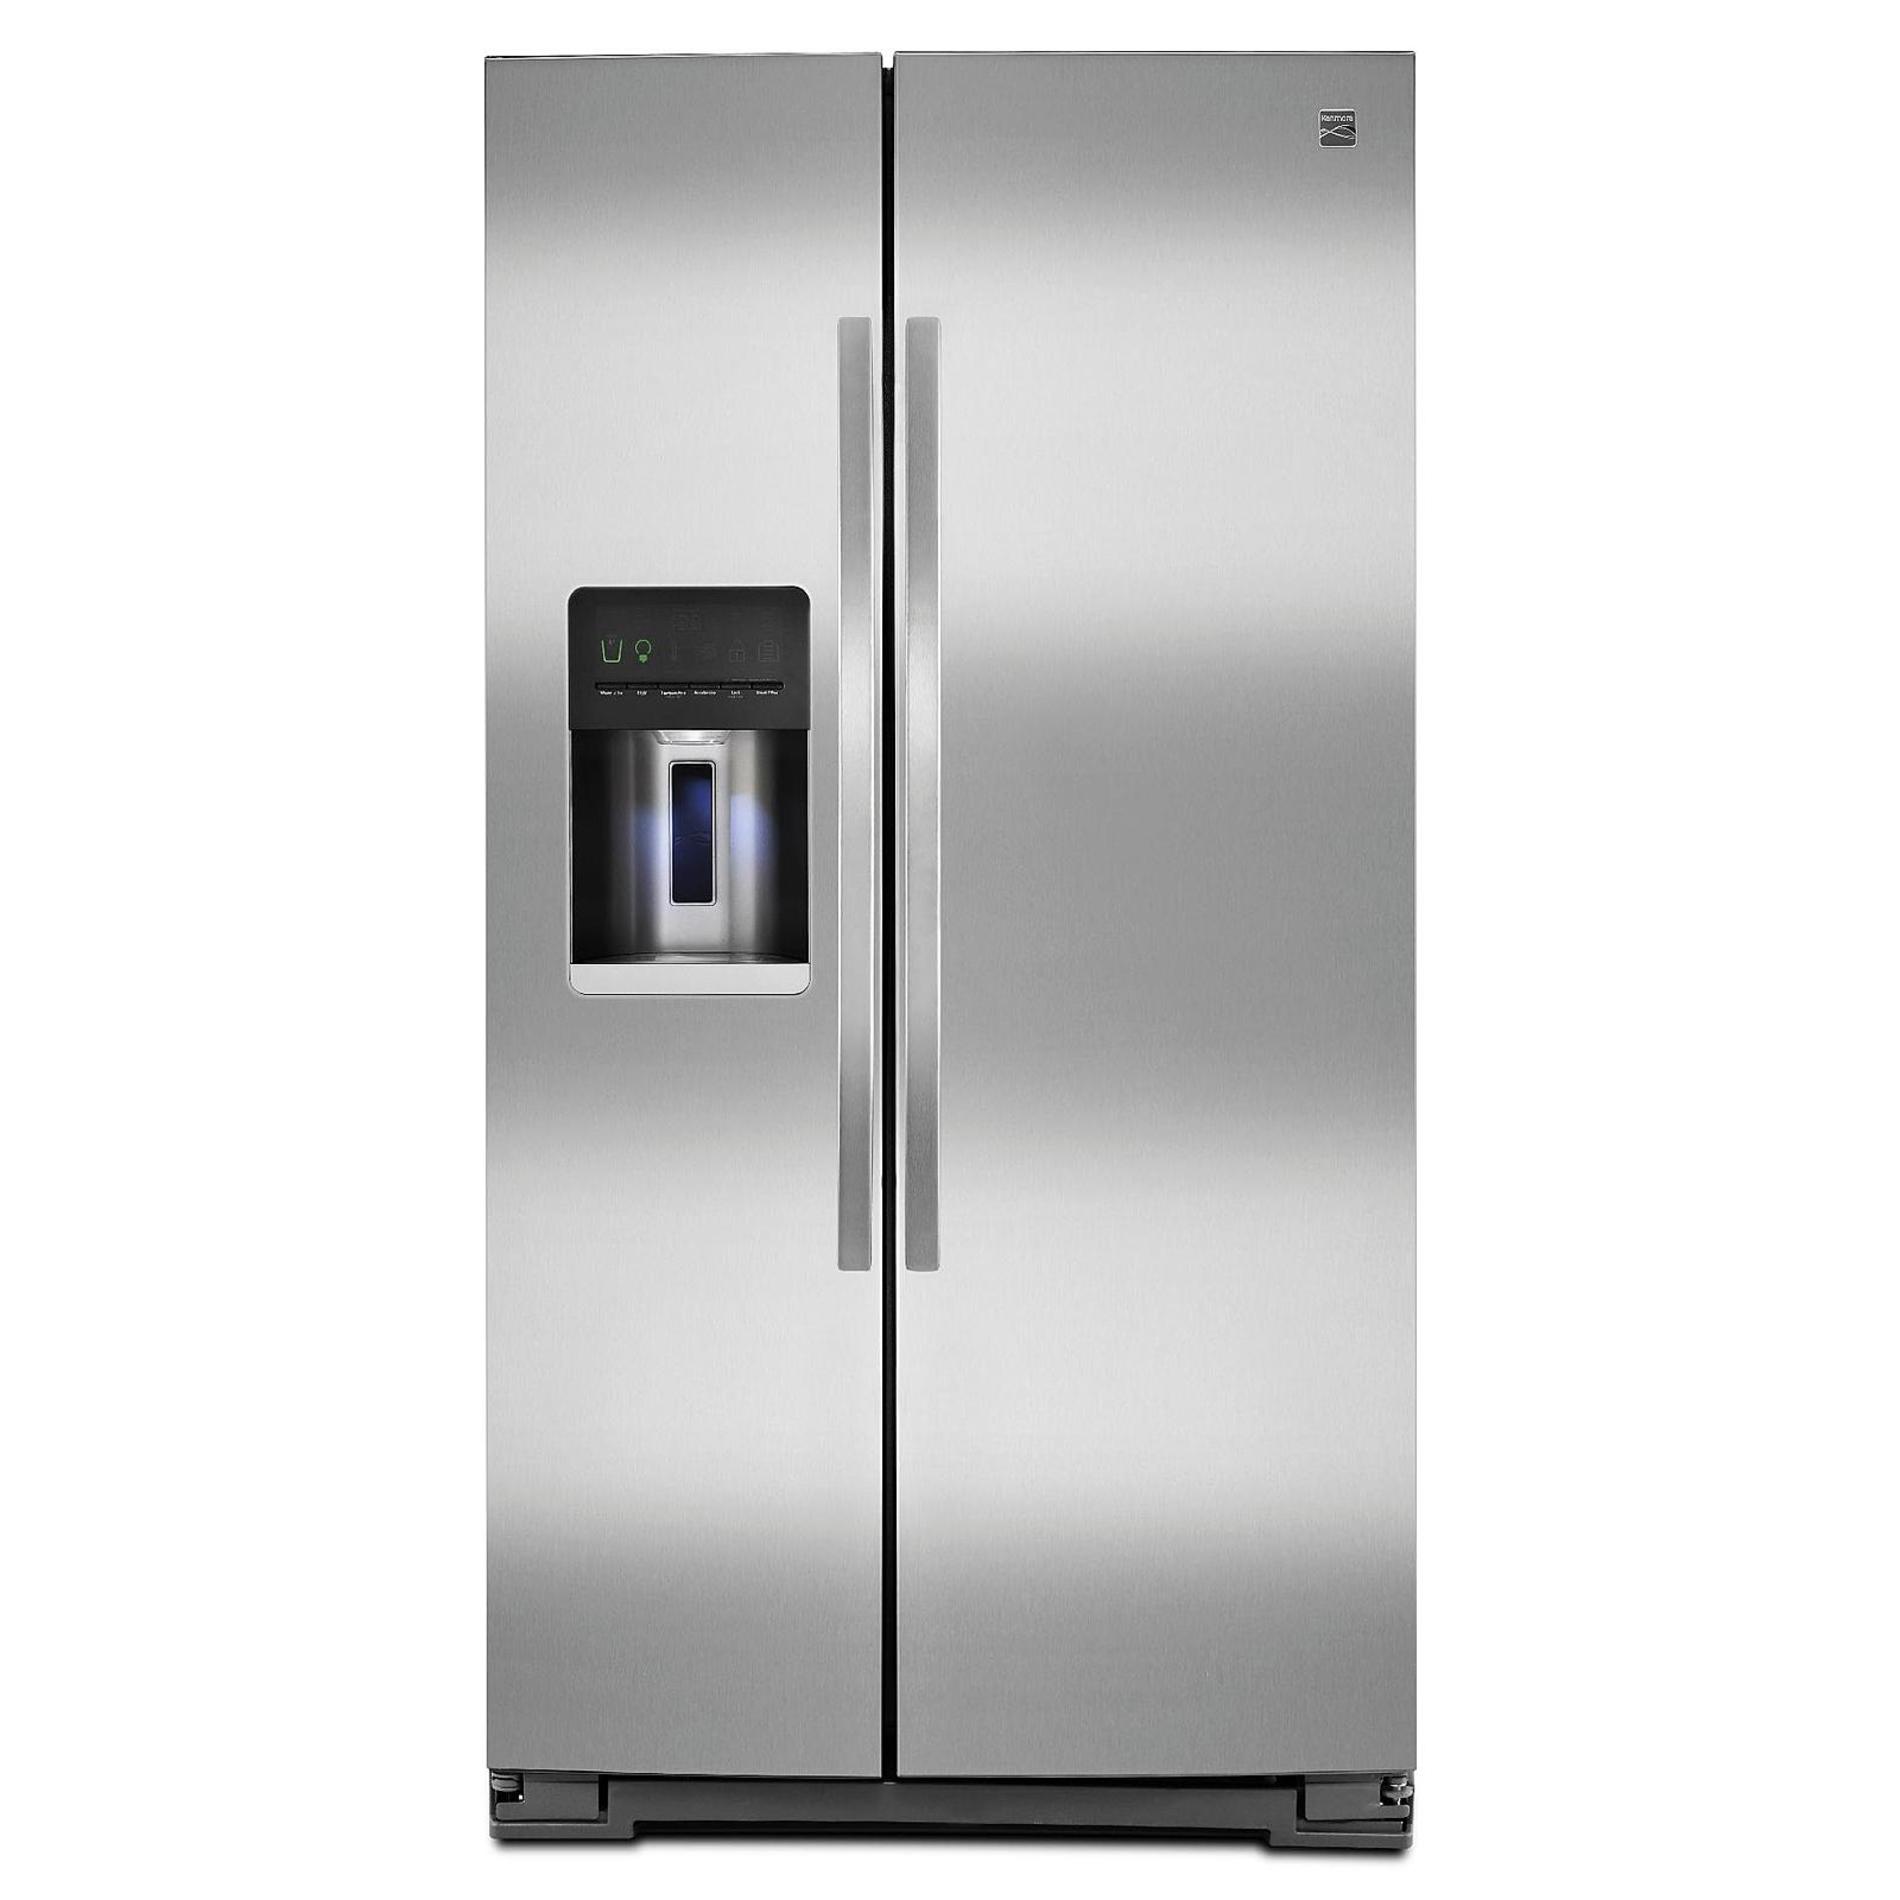 Kenmore 51133 26 Cu Ft Side By Side Refrigerator Stainless